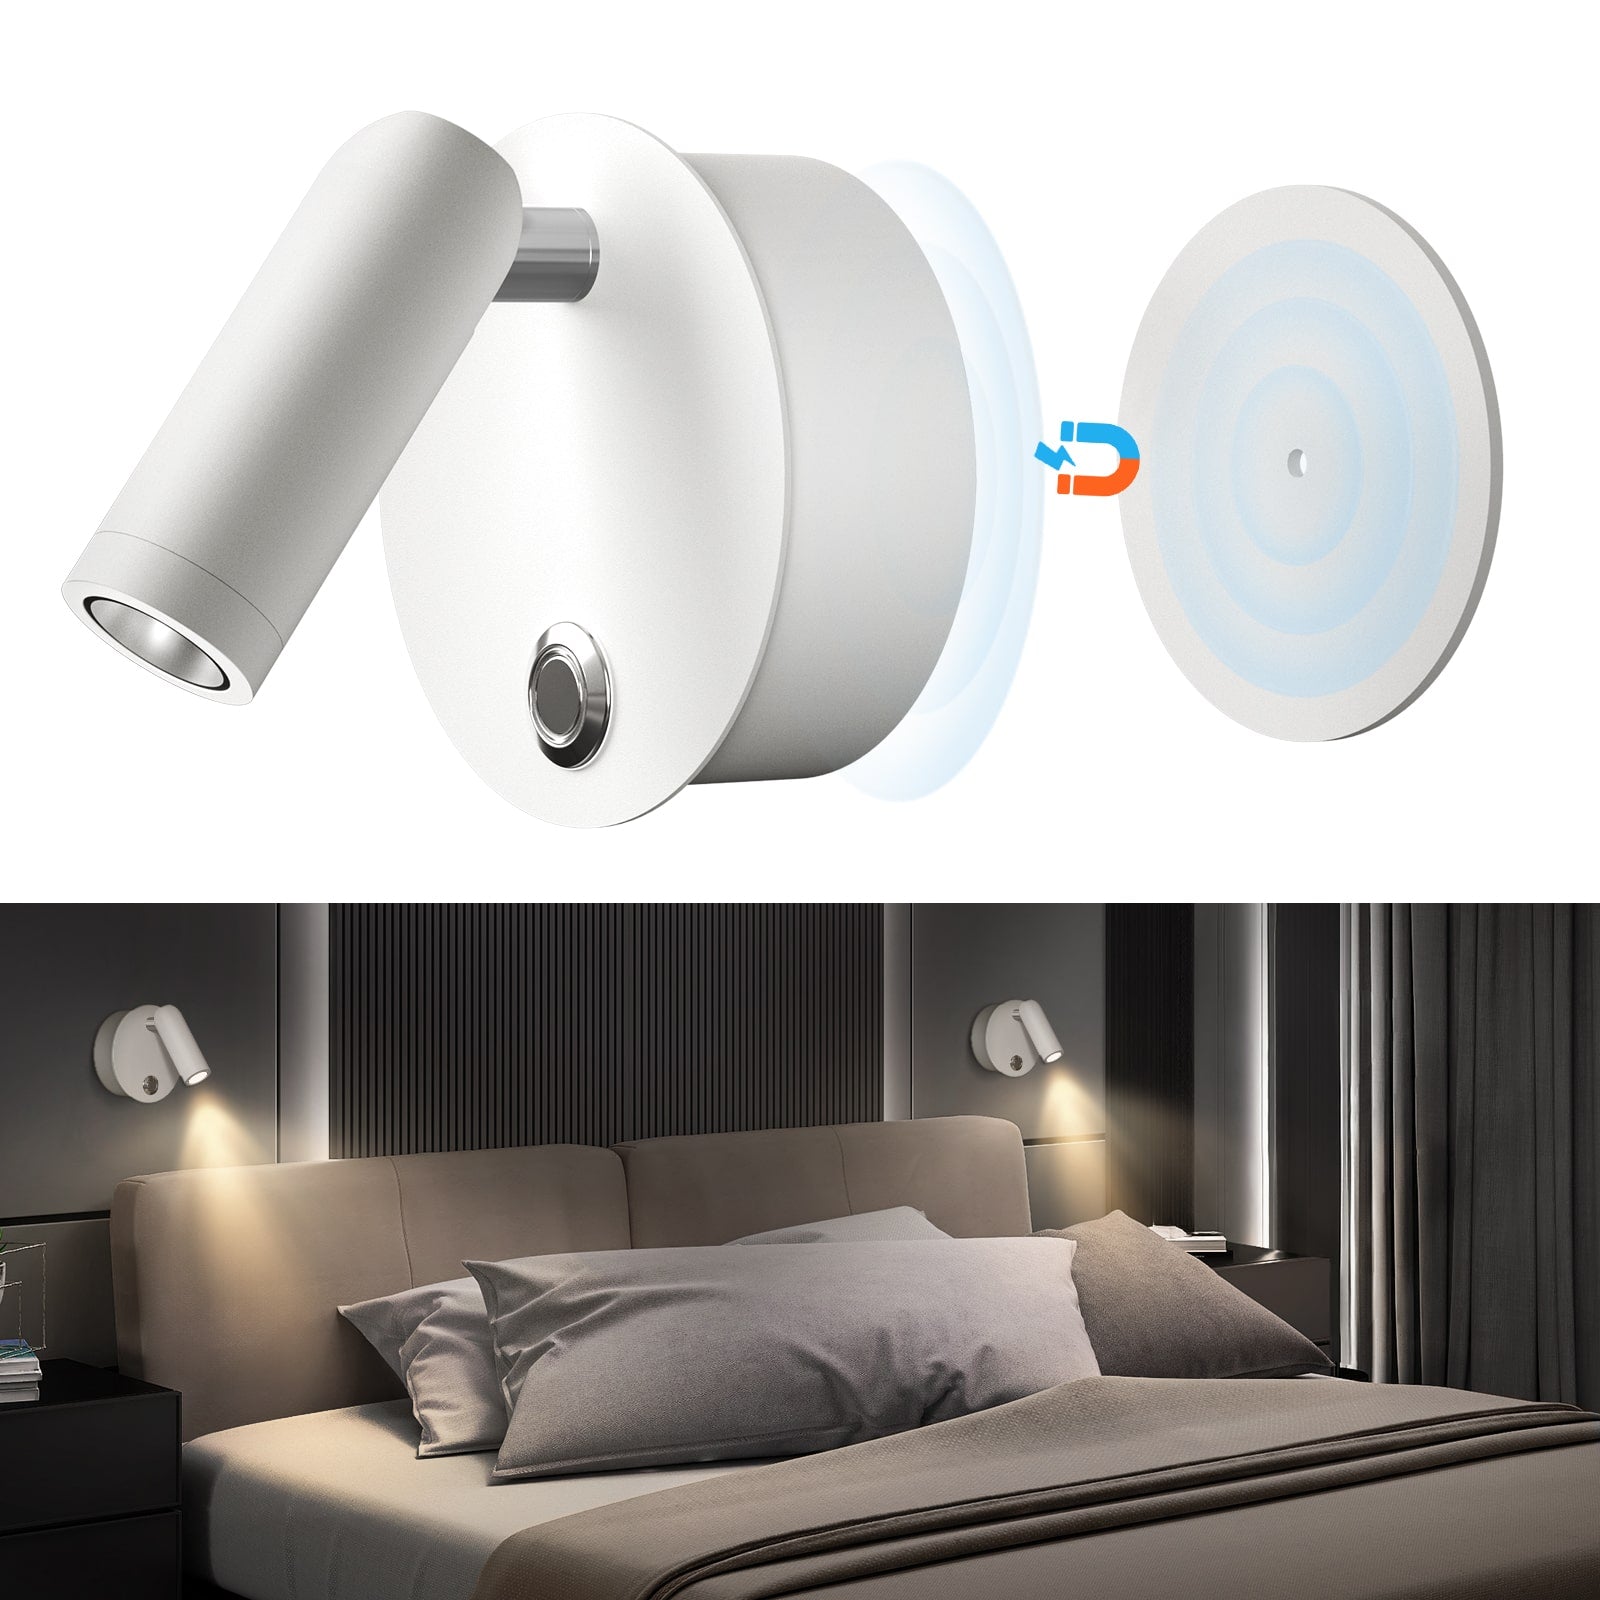 M09 LED Battery Operated Reading Wall Sconce Dimmable Magnetic for Kids Study Closet Bedroom